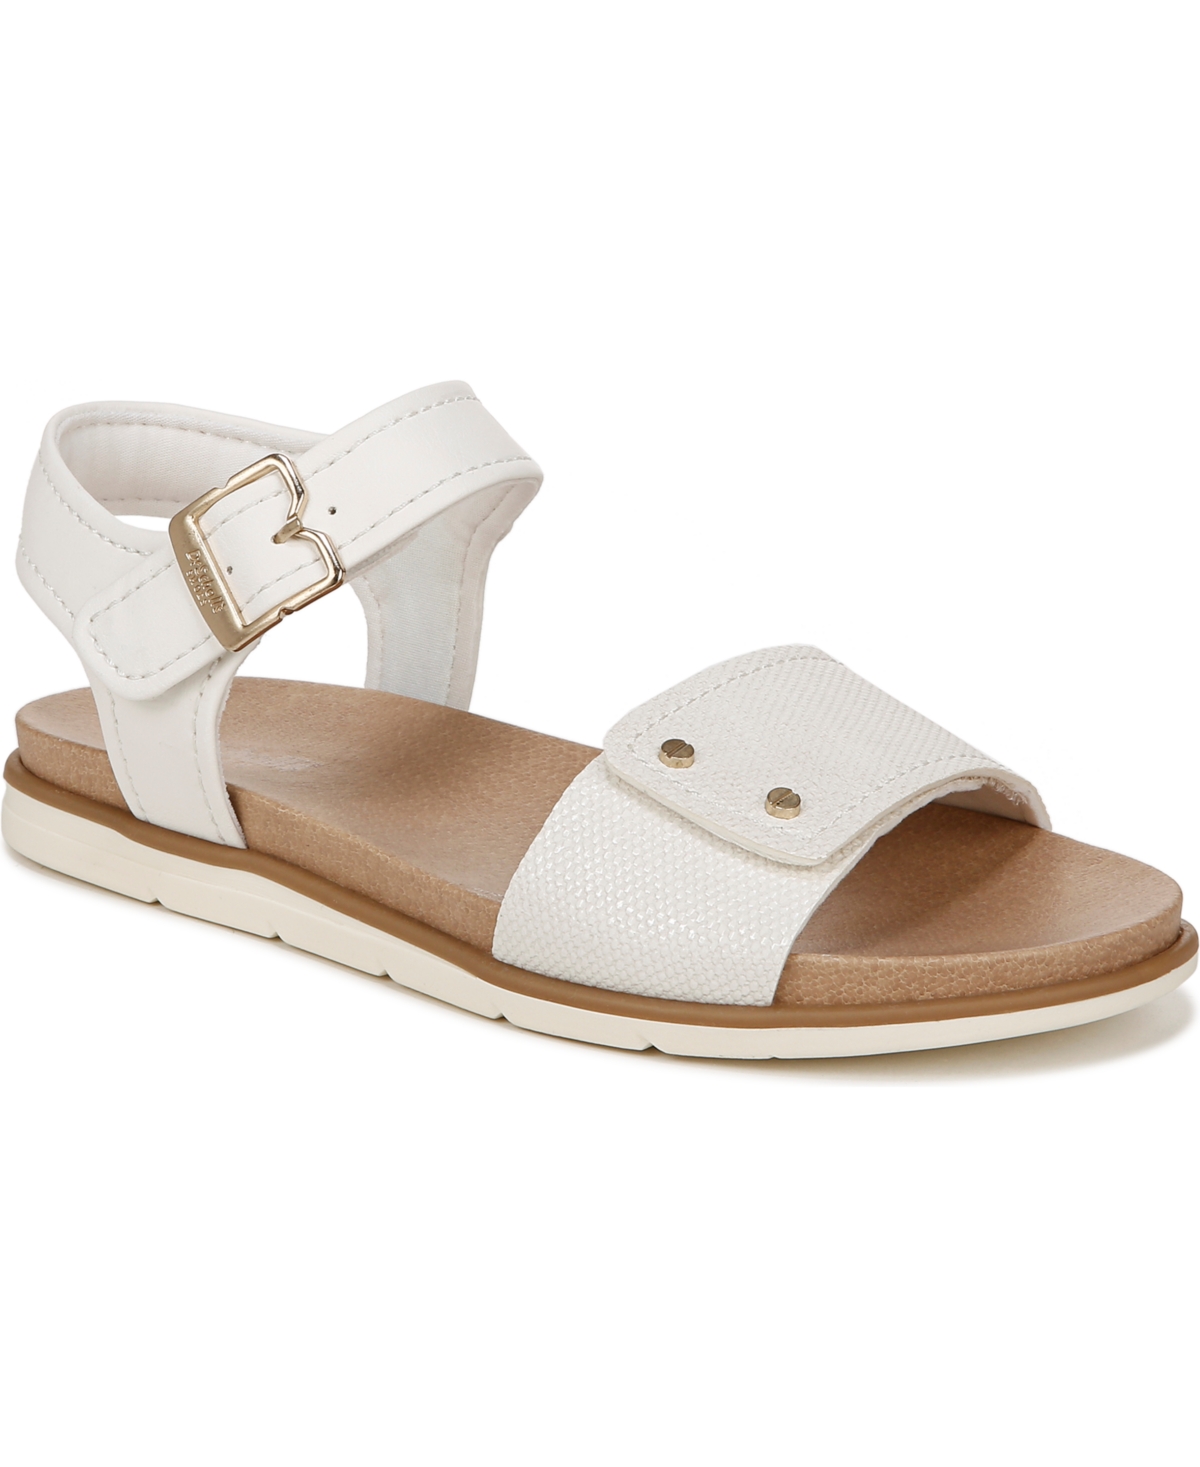 Dr. Scholl's Women's Nicely Sun Ankle Strap Sandals In Off White Faux Leather